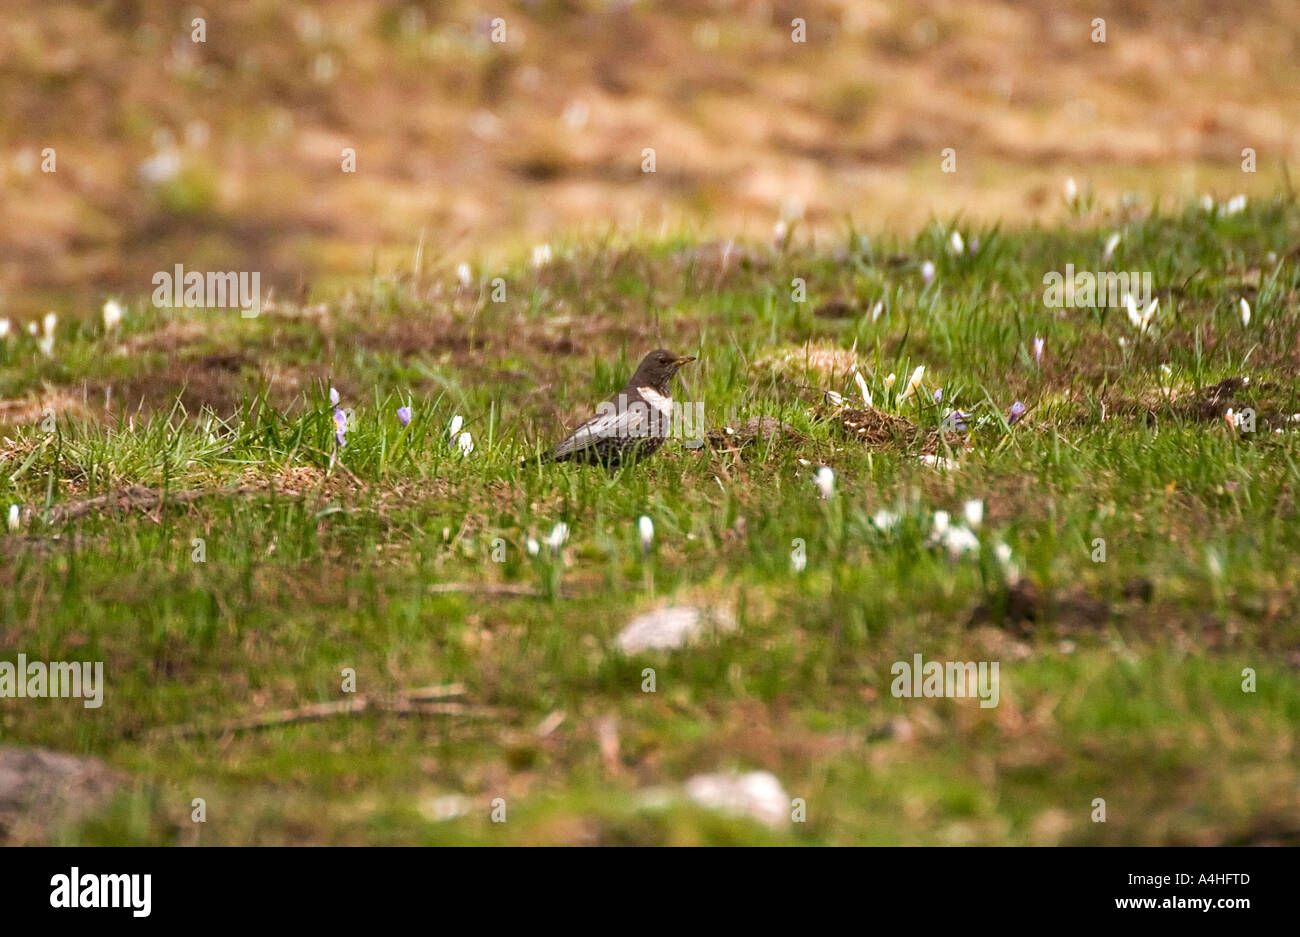 RING OUZEL Turdus torquatus in the meadow with flowers Stock Photo